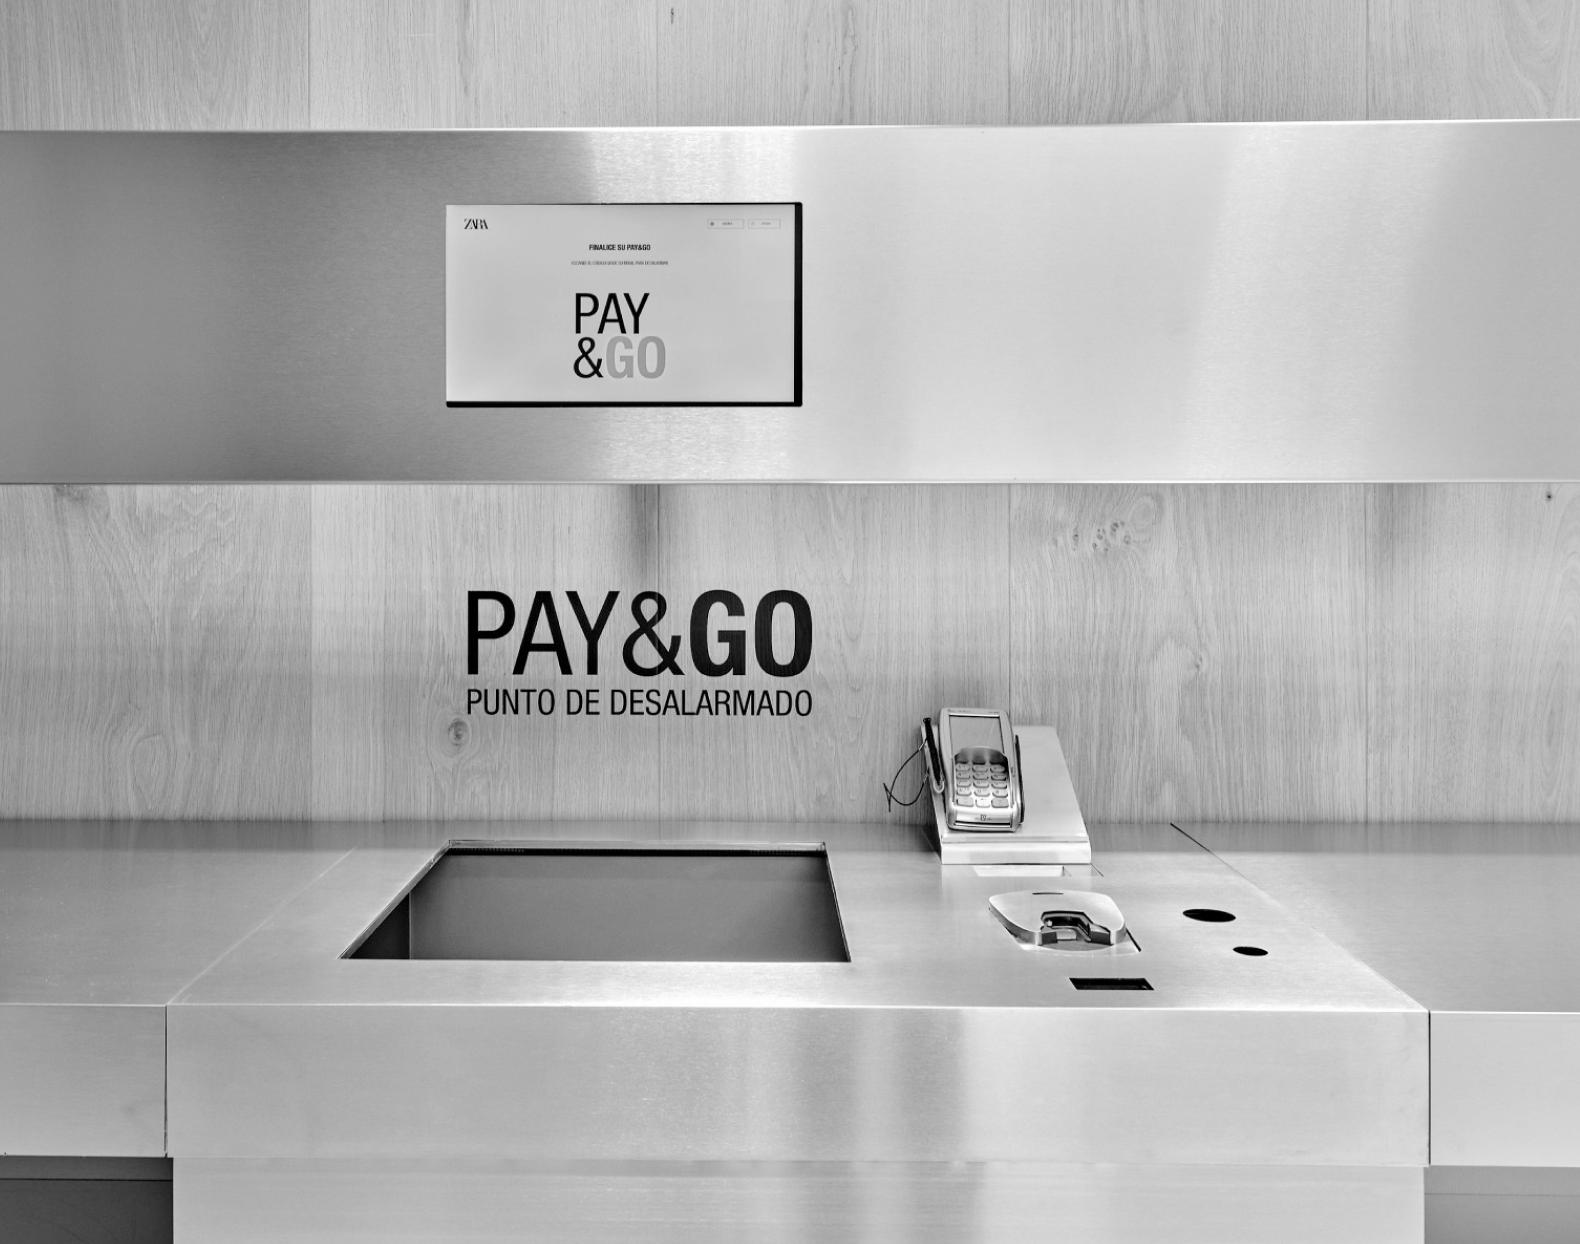 Detail of a Pay&Go checkout for payment in a Zara store in black and white